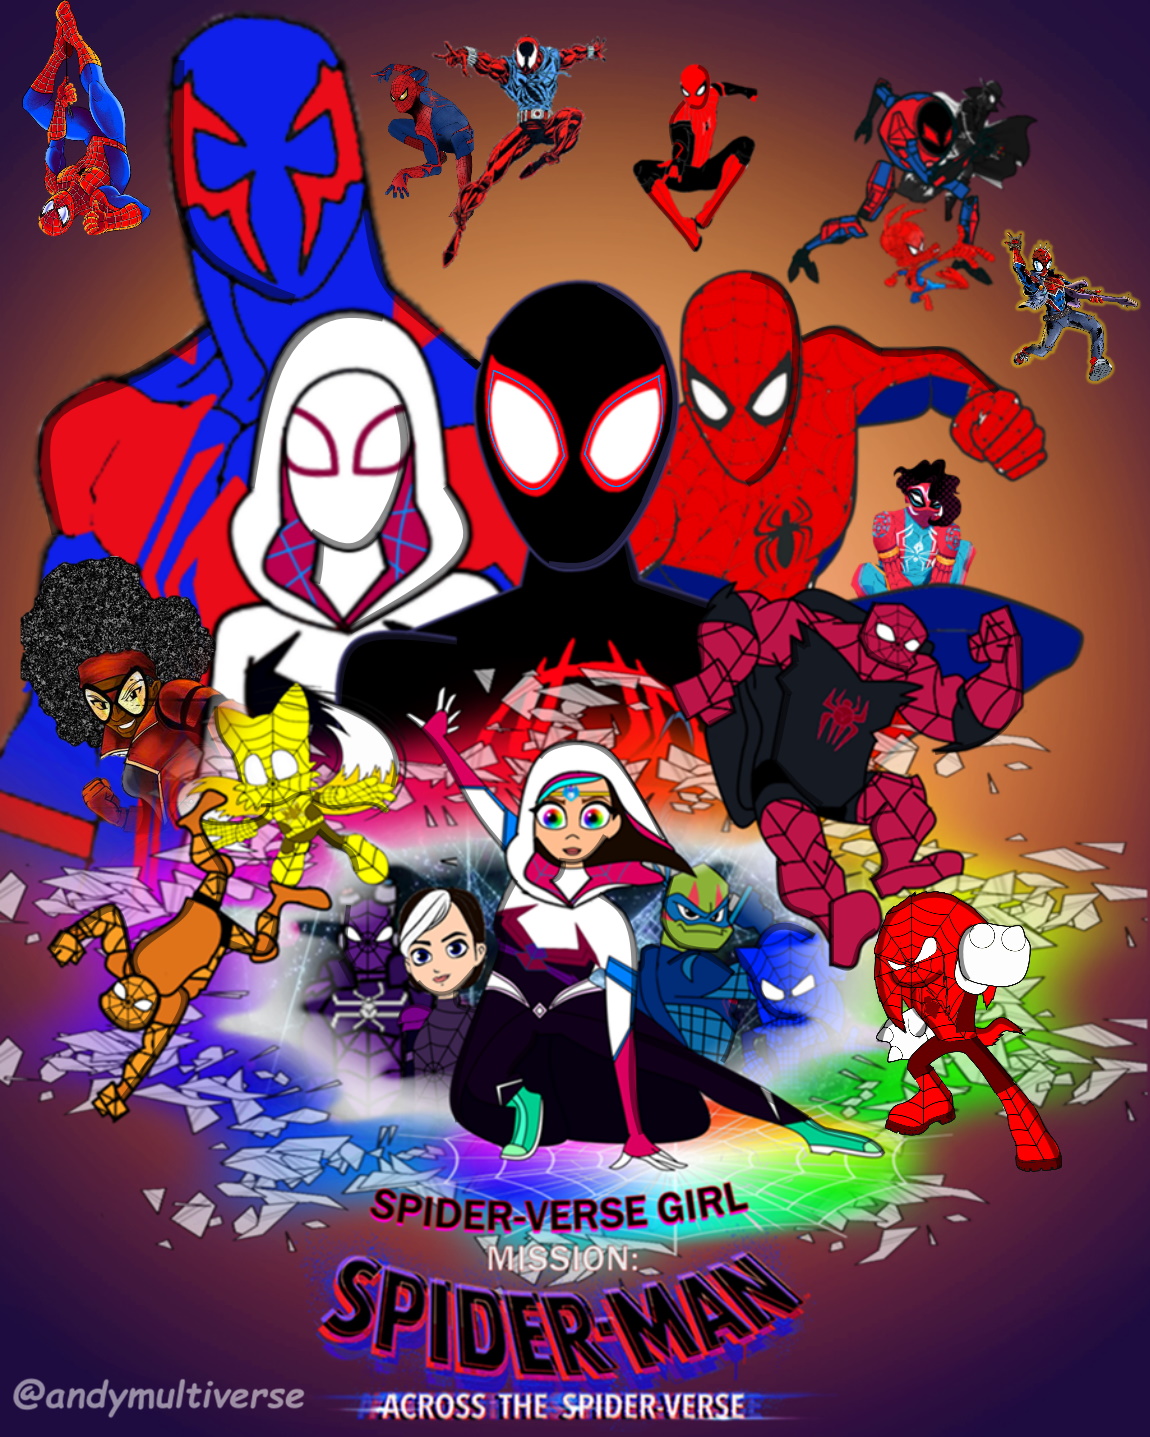 Fan made poster for Spider-Man Across the Spider-Verse illustrated